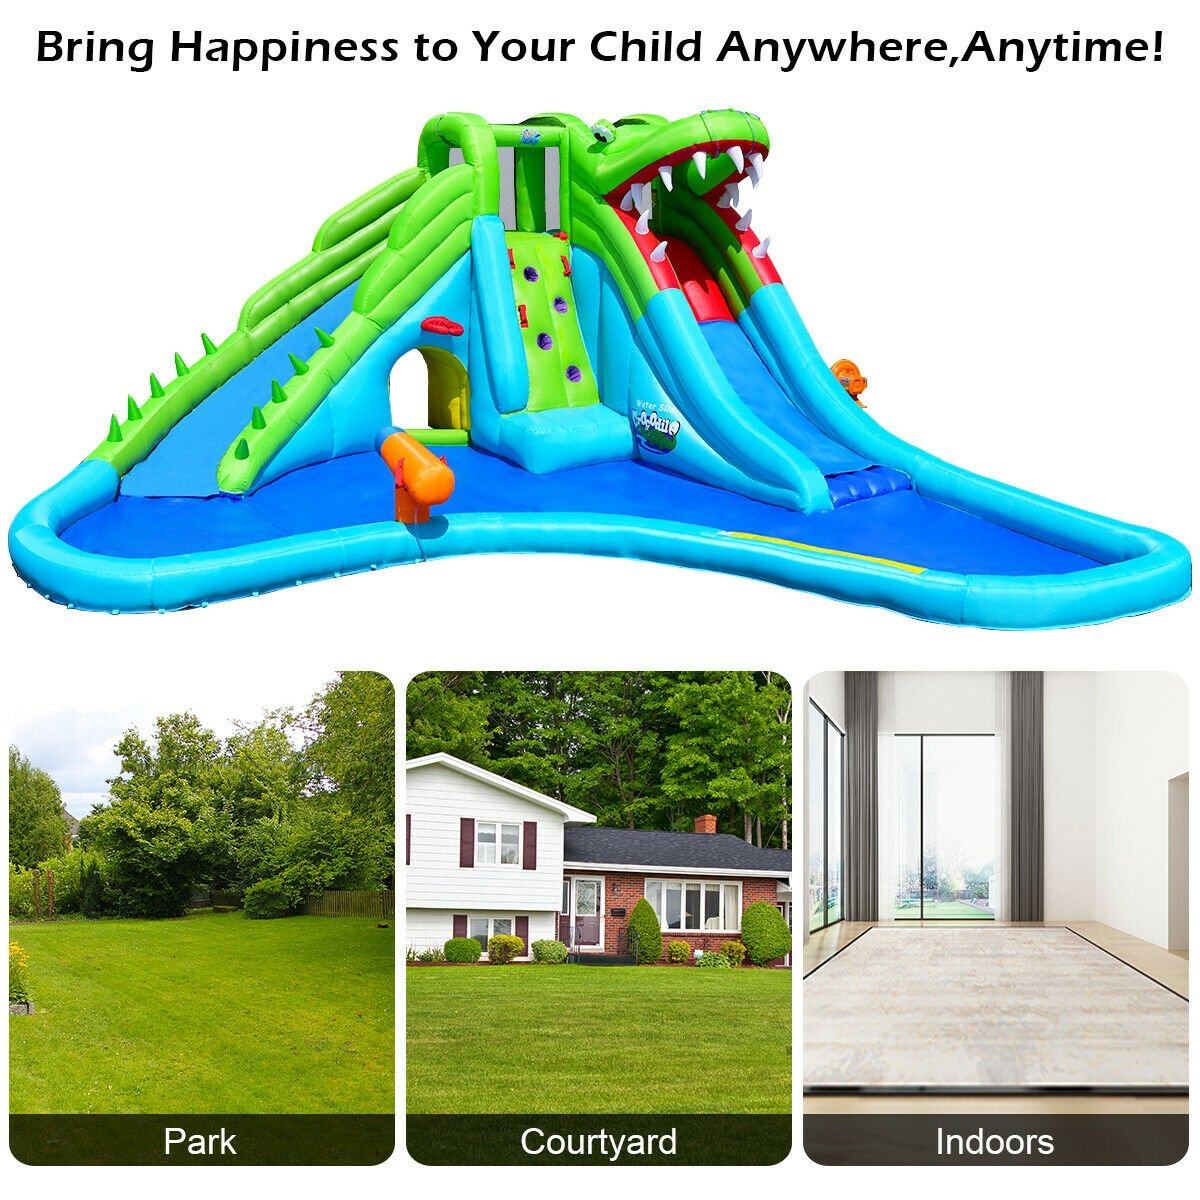 Inflatable Crocodile Water Slide Climbing Wall Bounce House at Gallery Canada